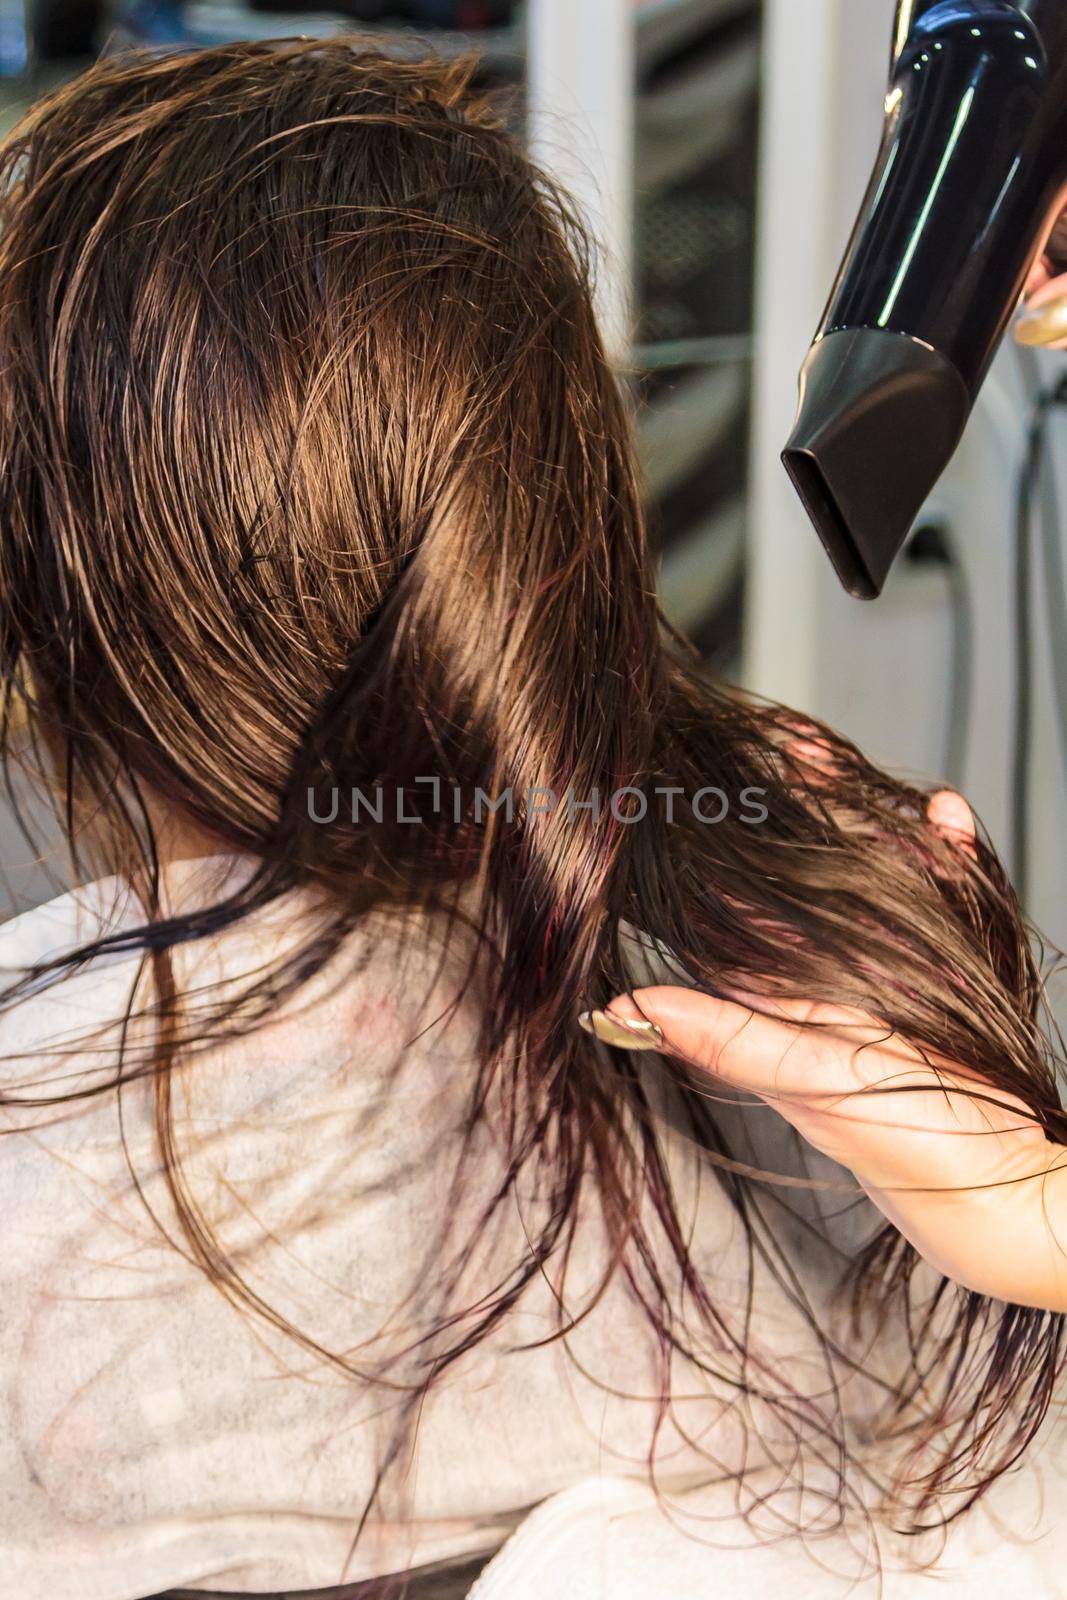 Young girl, hairdresser dries her hair with a hairdryer in a beauty salon. Long brown hair